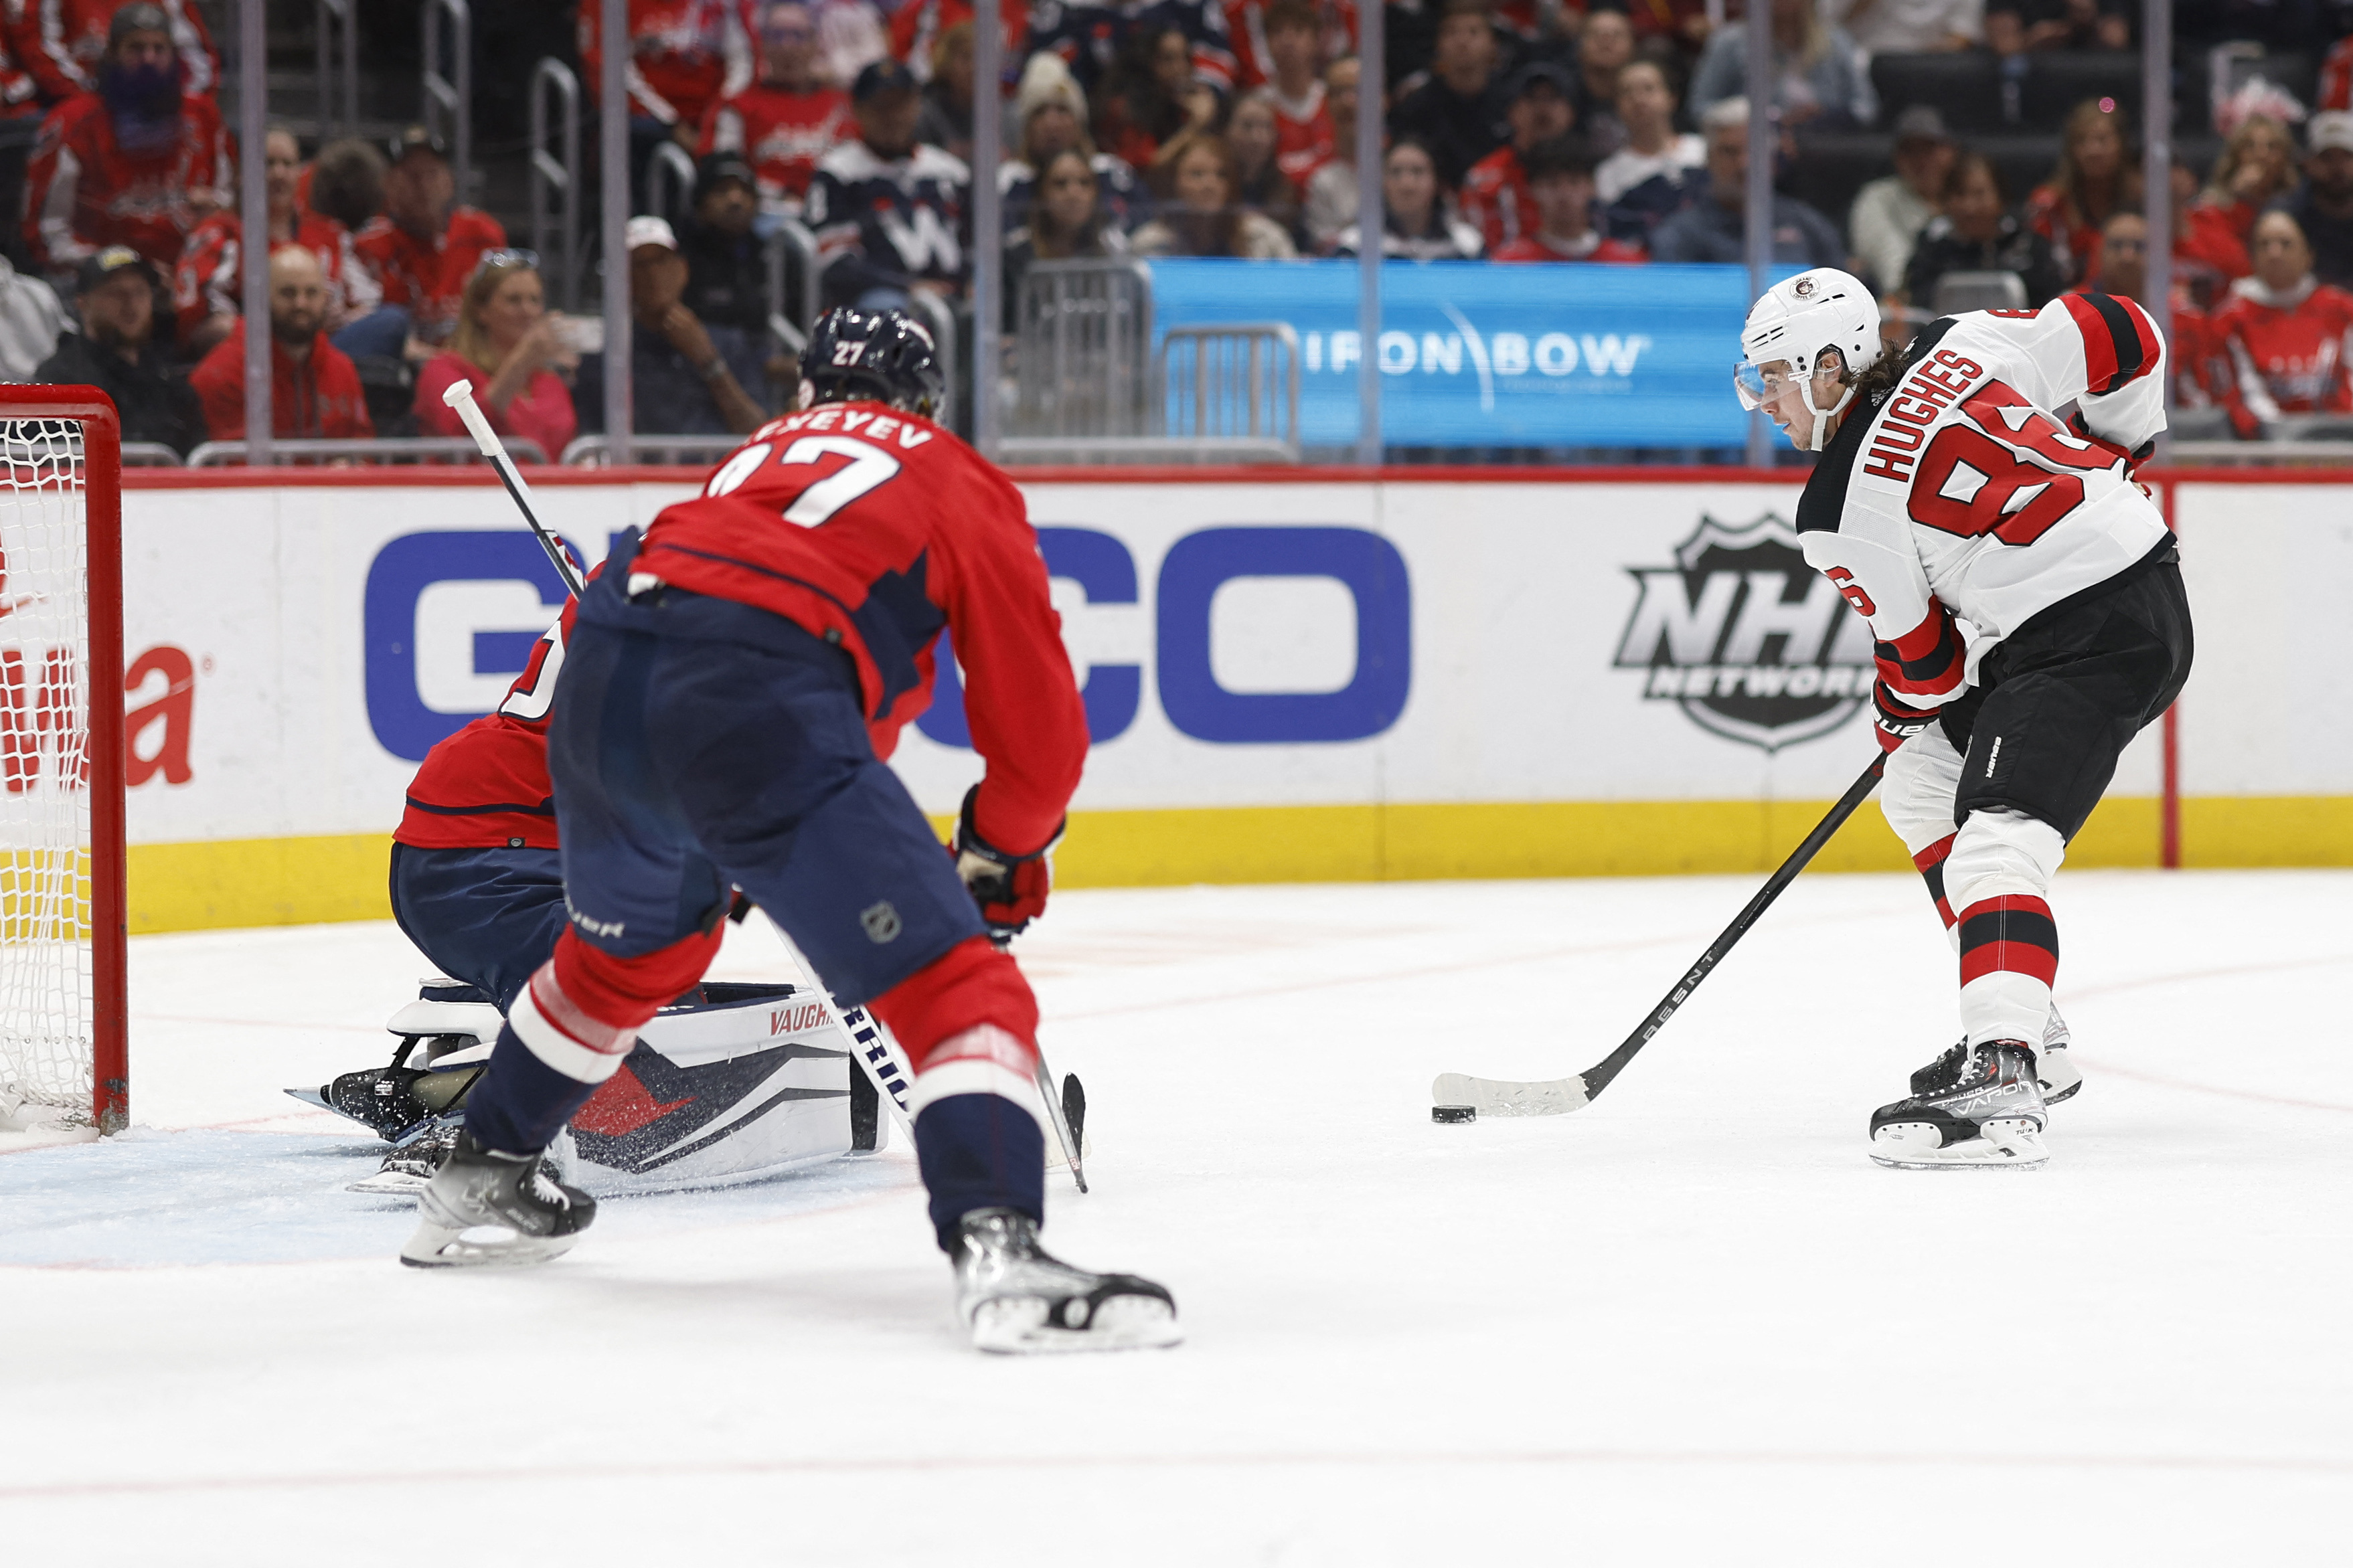 Capitals amp up the urgency against Devils before faltering in shootout -  The Washington Post